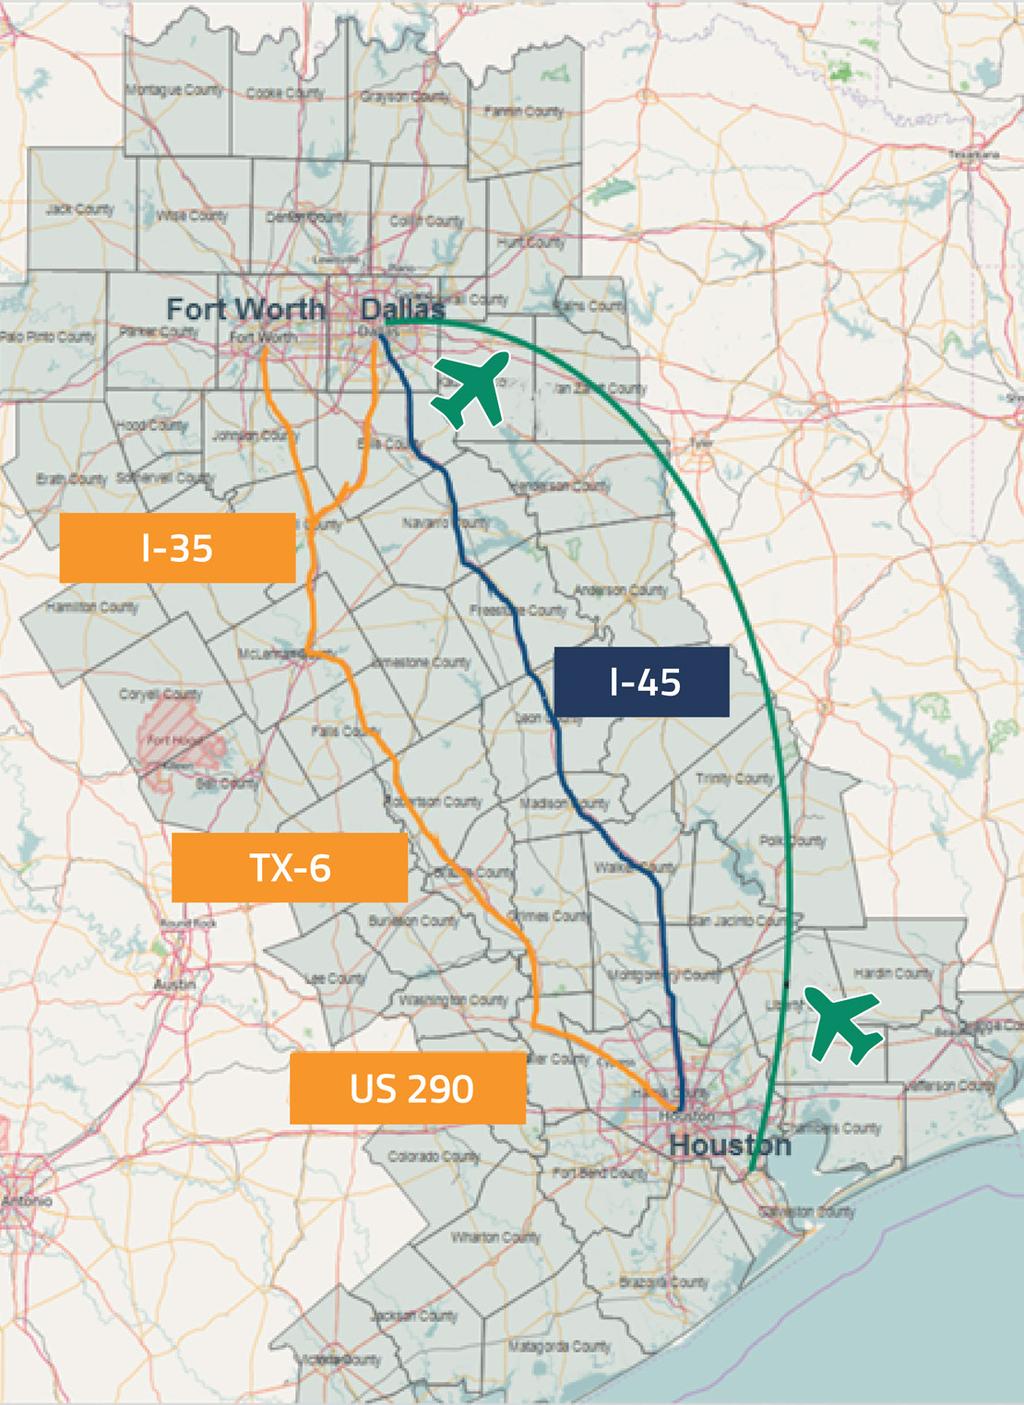 1. TRAVEL MARKET OVERVIEW TEXANS LIKE TO TRAVEL ACROSS TEXAS Each year, roughly 14 million journeys 1 are made between Greater Houston and North Texas.